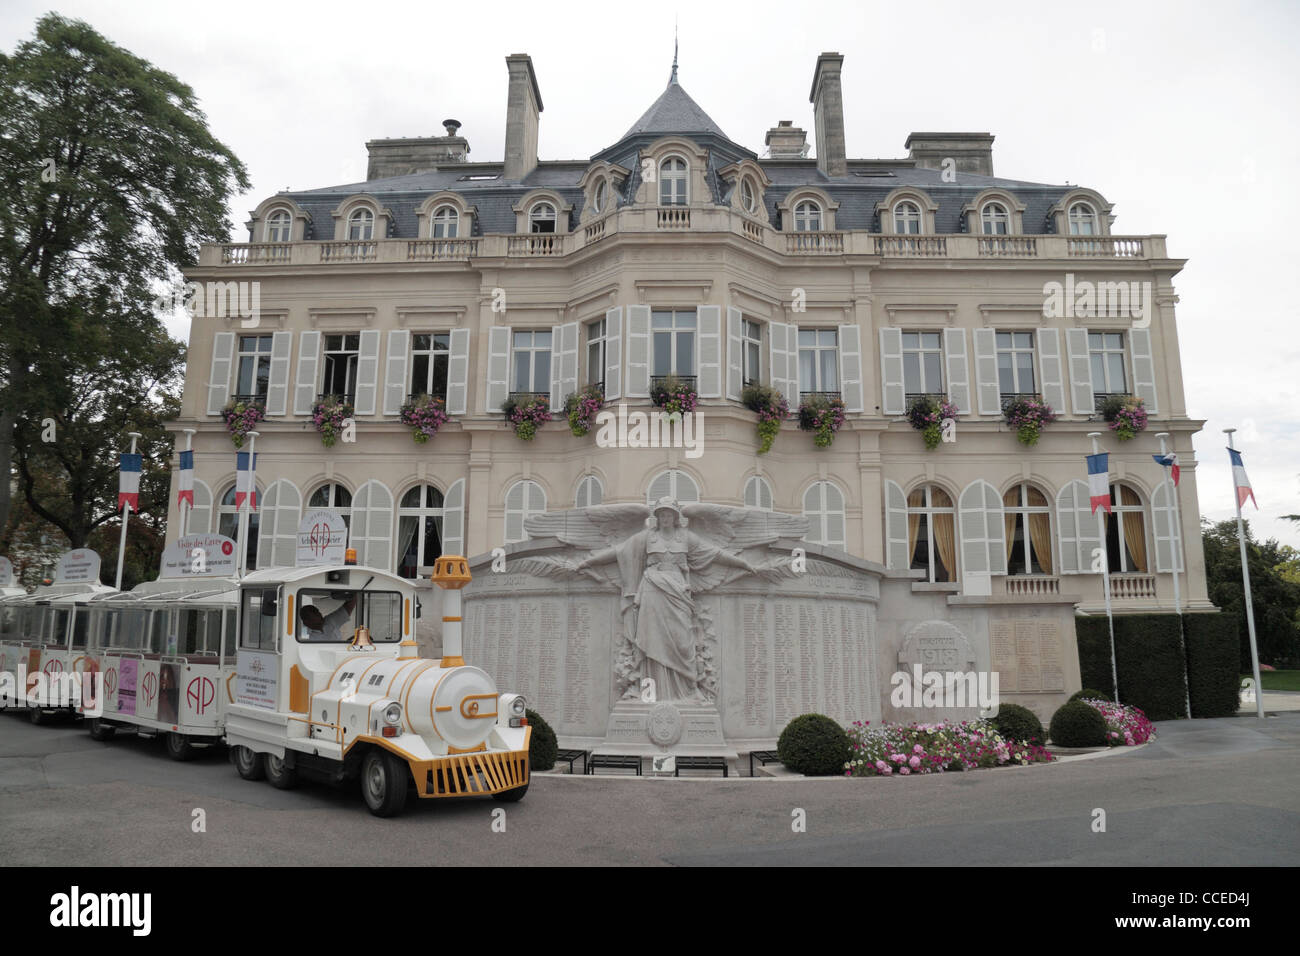 Tourist train in front of the Hotel de Ville (town hall), Épernay, Champagne-Ardenne, Marne, France. Stock Photo